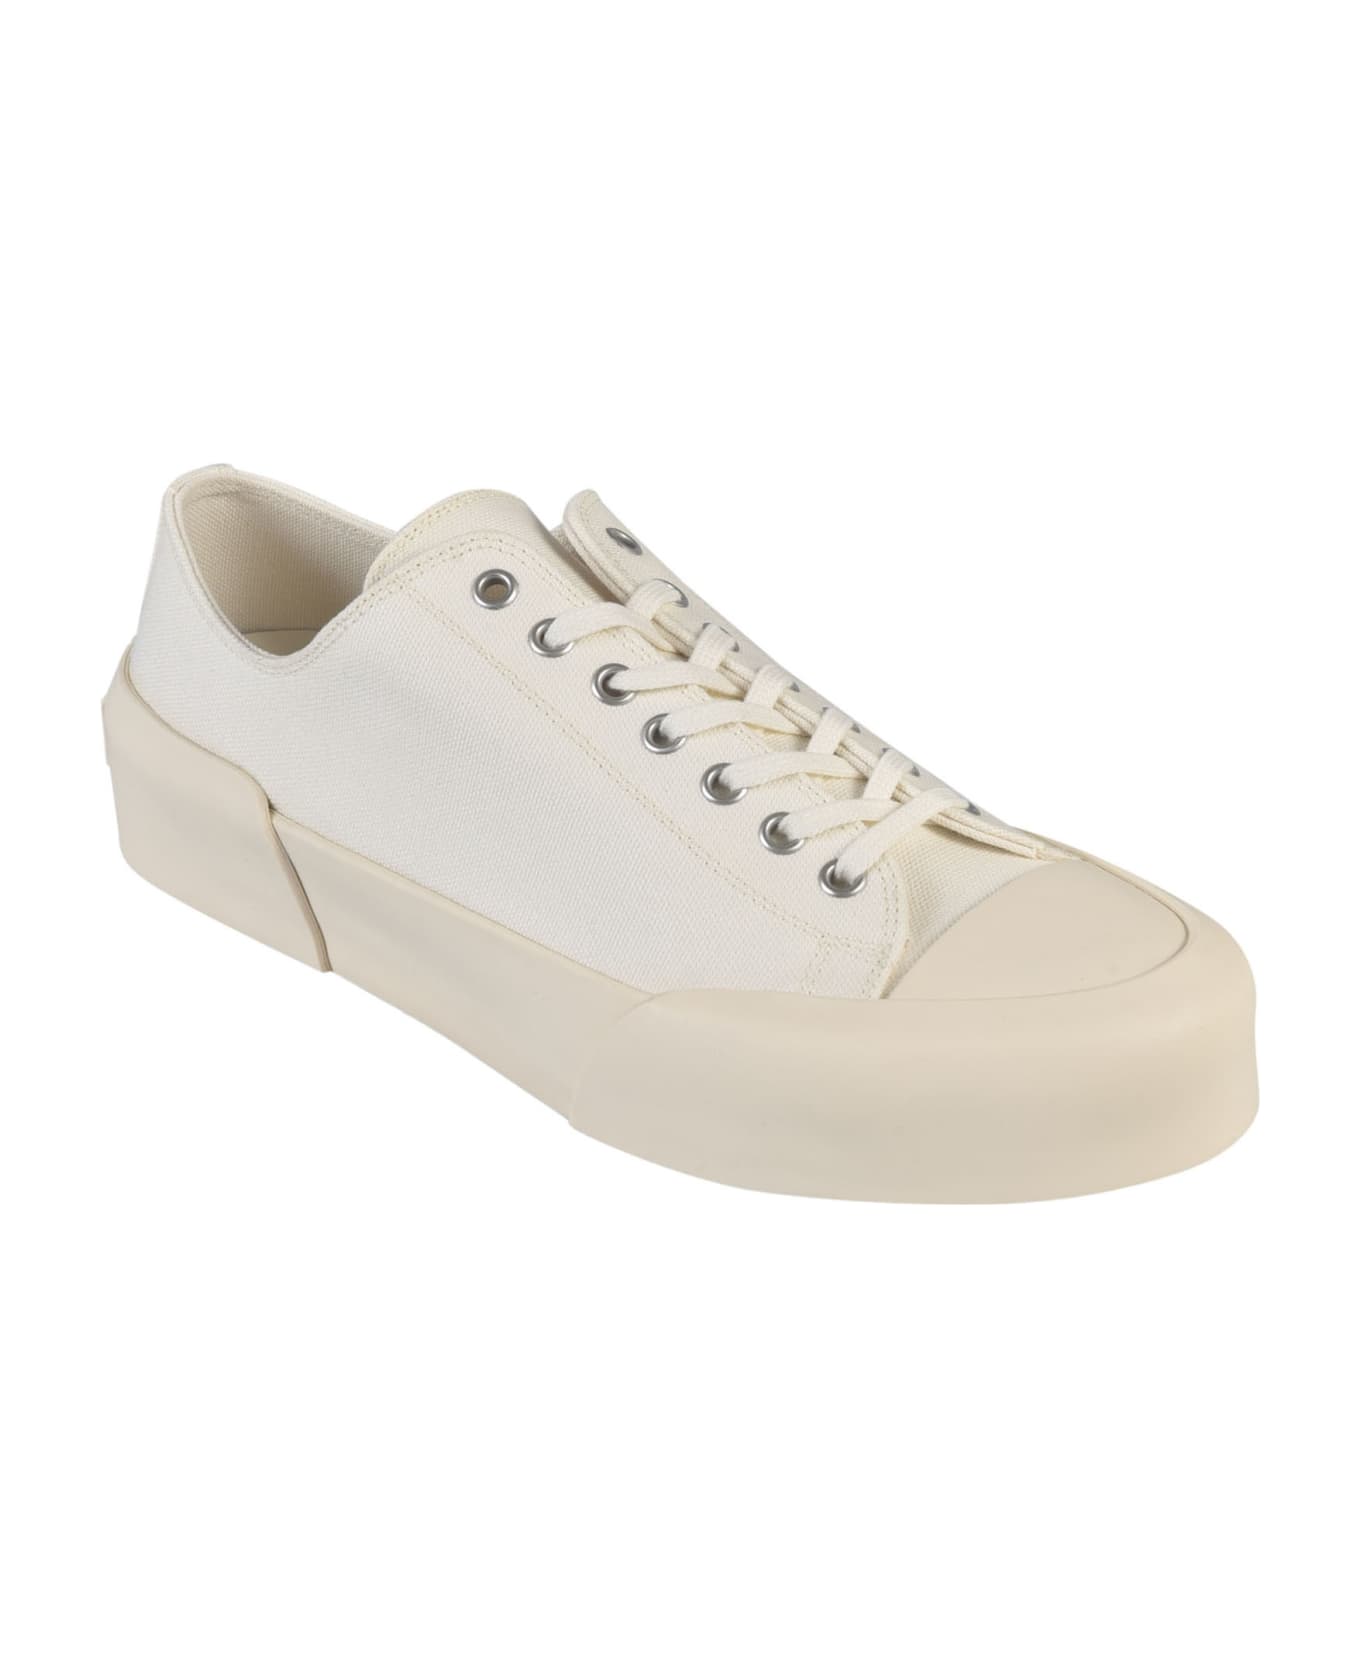 Jil Sander White Lace-up Low Top Sneakers - PORCELAIN スニーカー